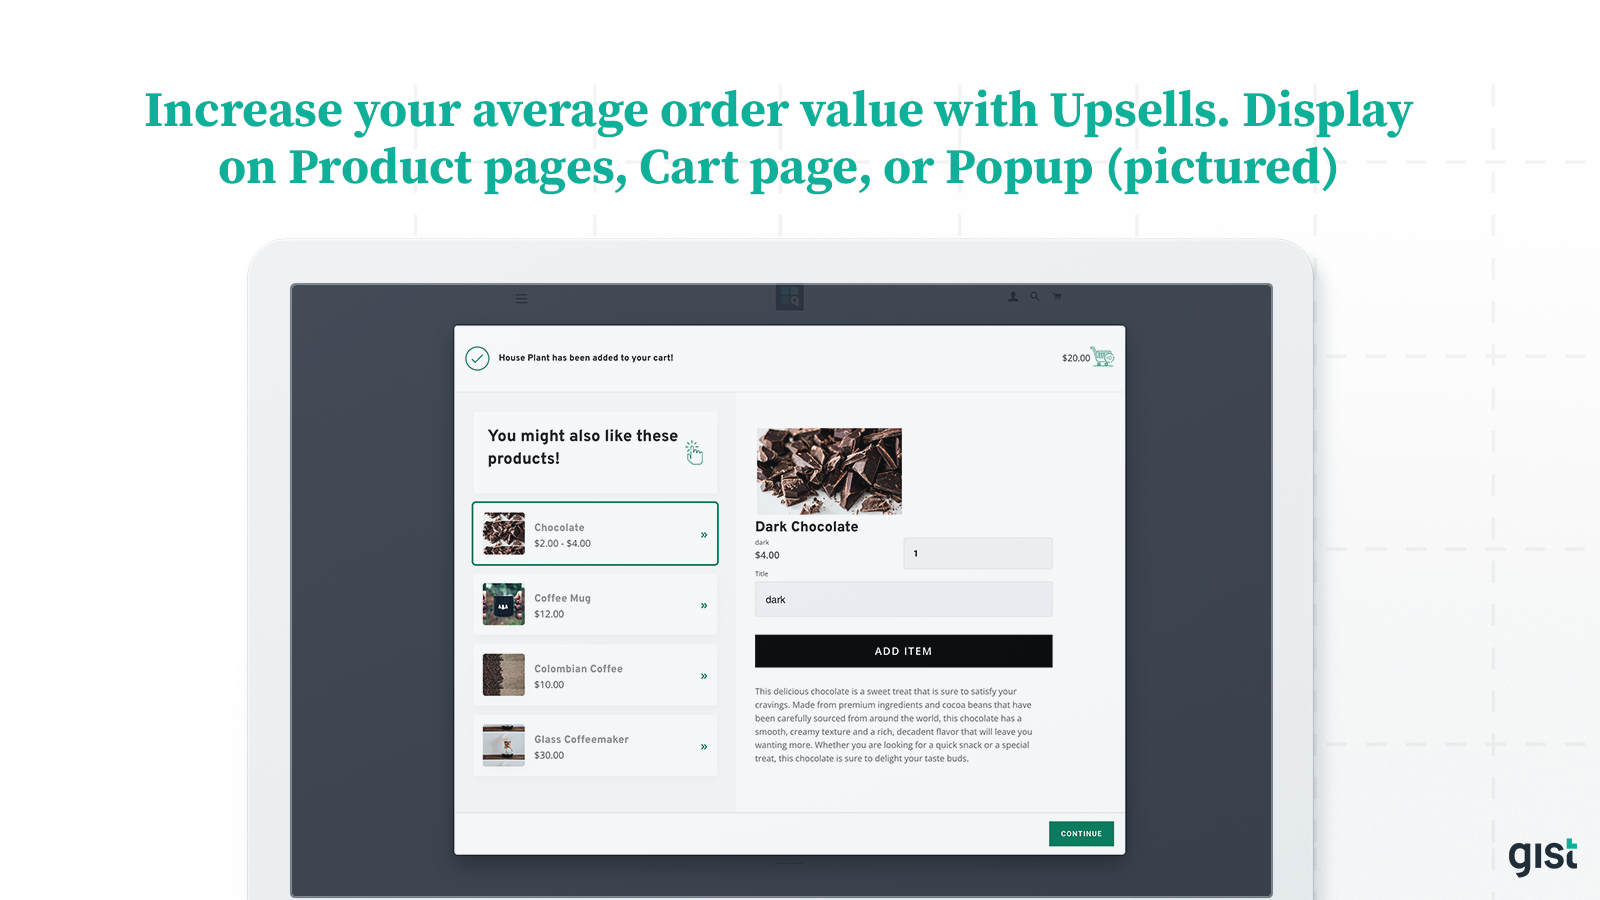 Increase your average order value with powerful upsell tools.